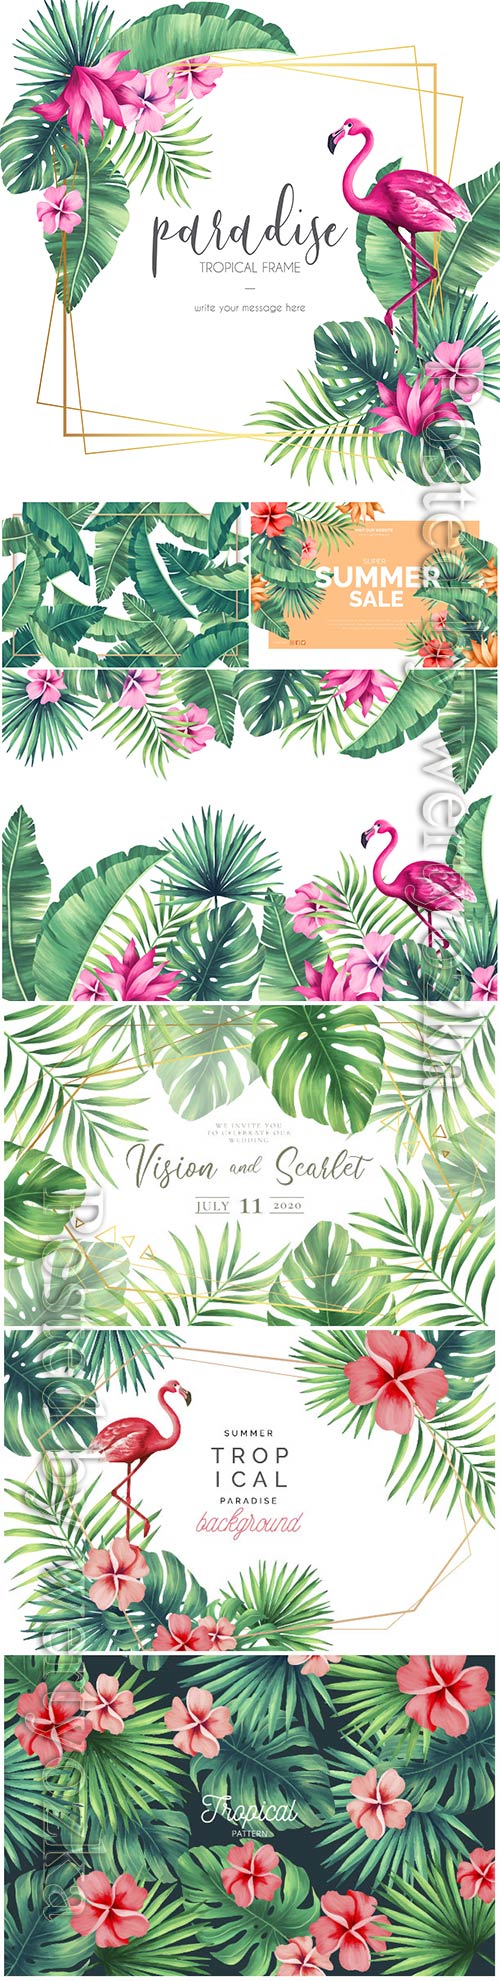 Tropical paradise summer vector background